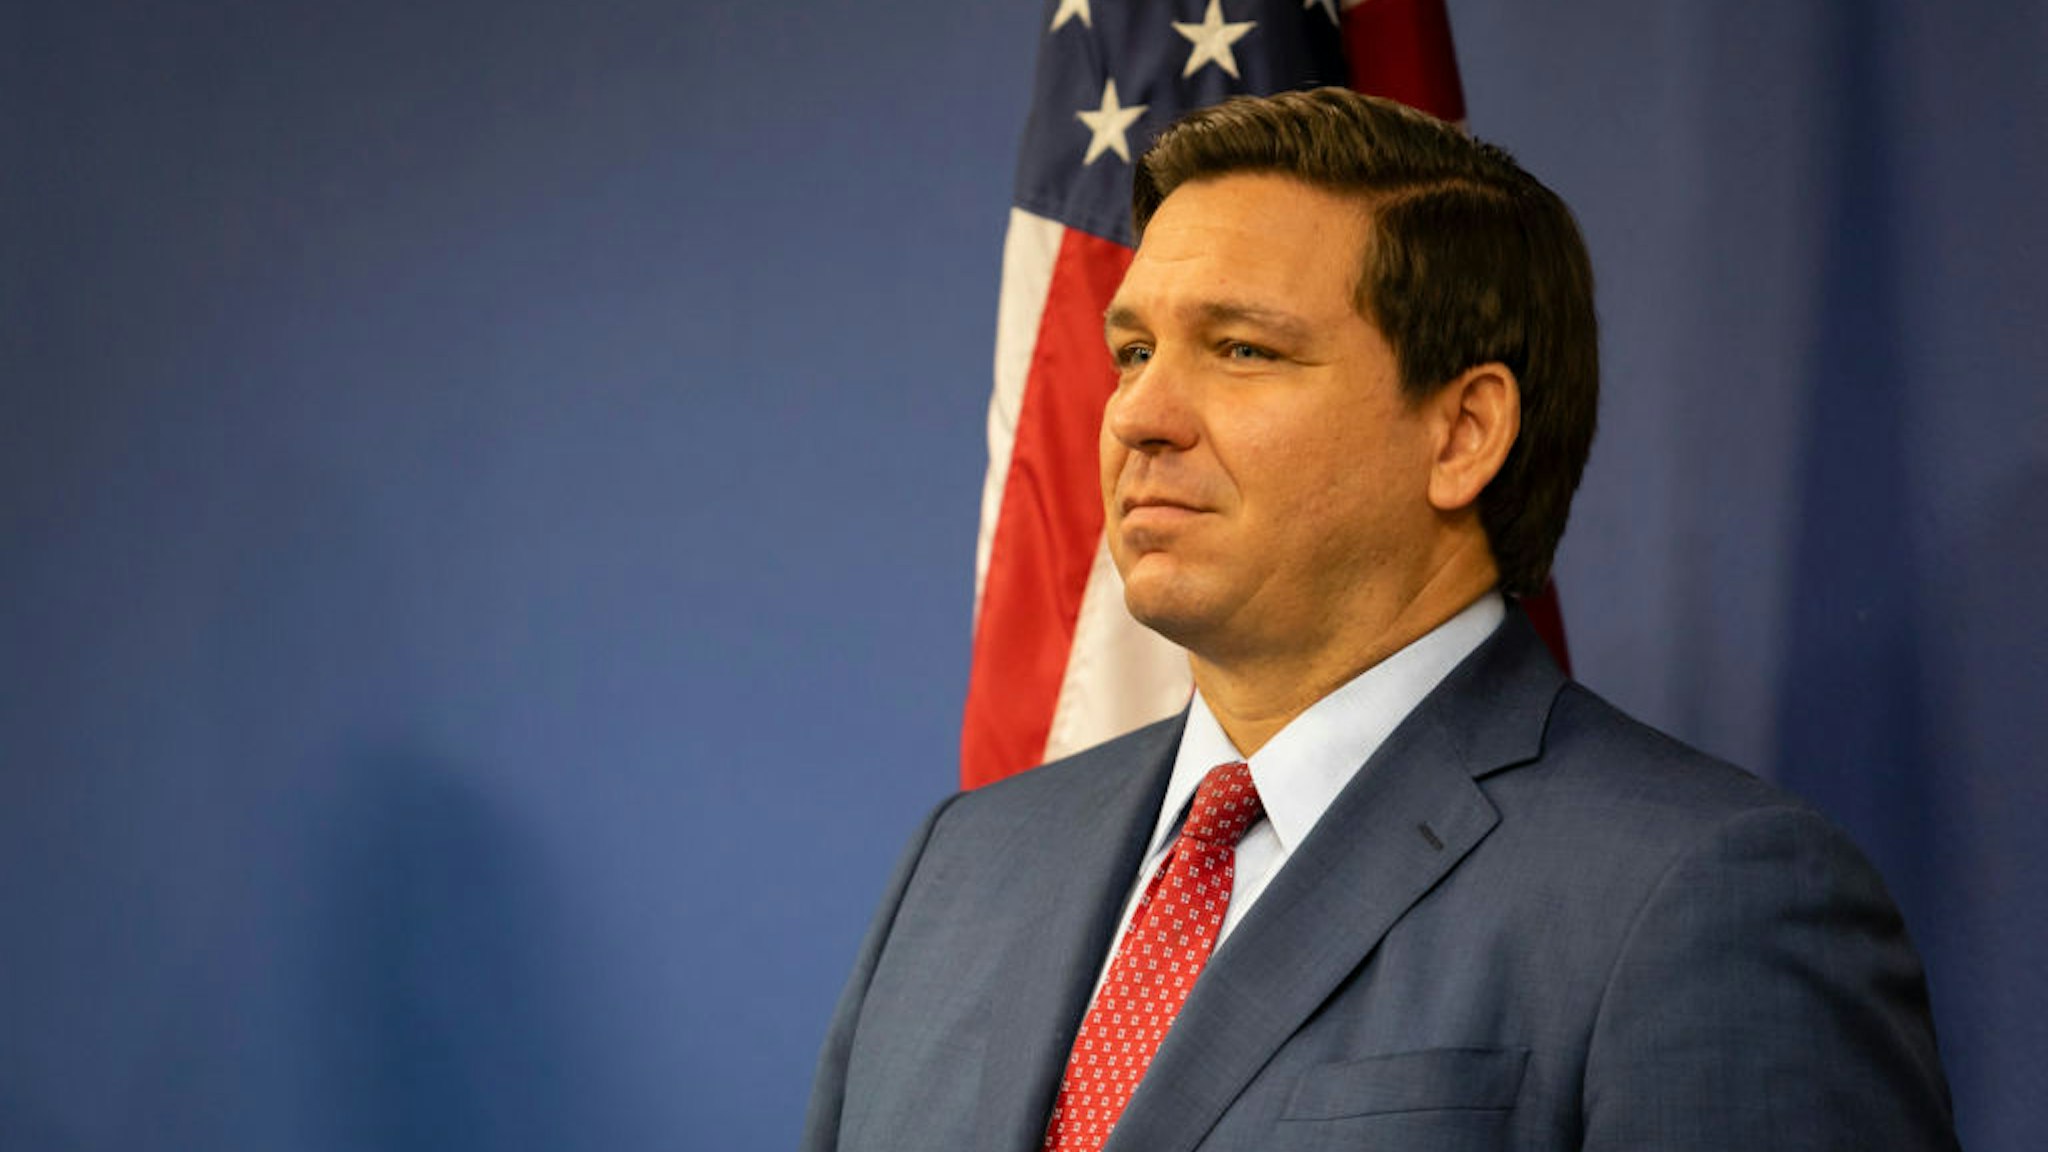 MIAMI, FL - JUNE 08: Florida Governor Ron DeSantis is seen during a press conference relating hurricane season updates at the Miami-Dade Emergency Operations Center on June 8, 2020 in Miami, Florida. NOAA has predicted that this year's Atlantic hurricane season will be more active than usual with up to 19 named storms and 6 major hurricanes possible.